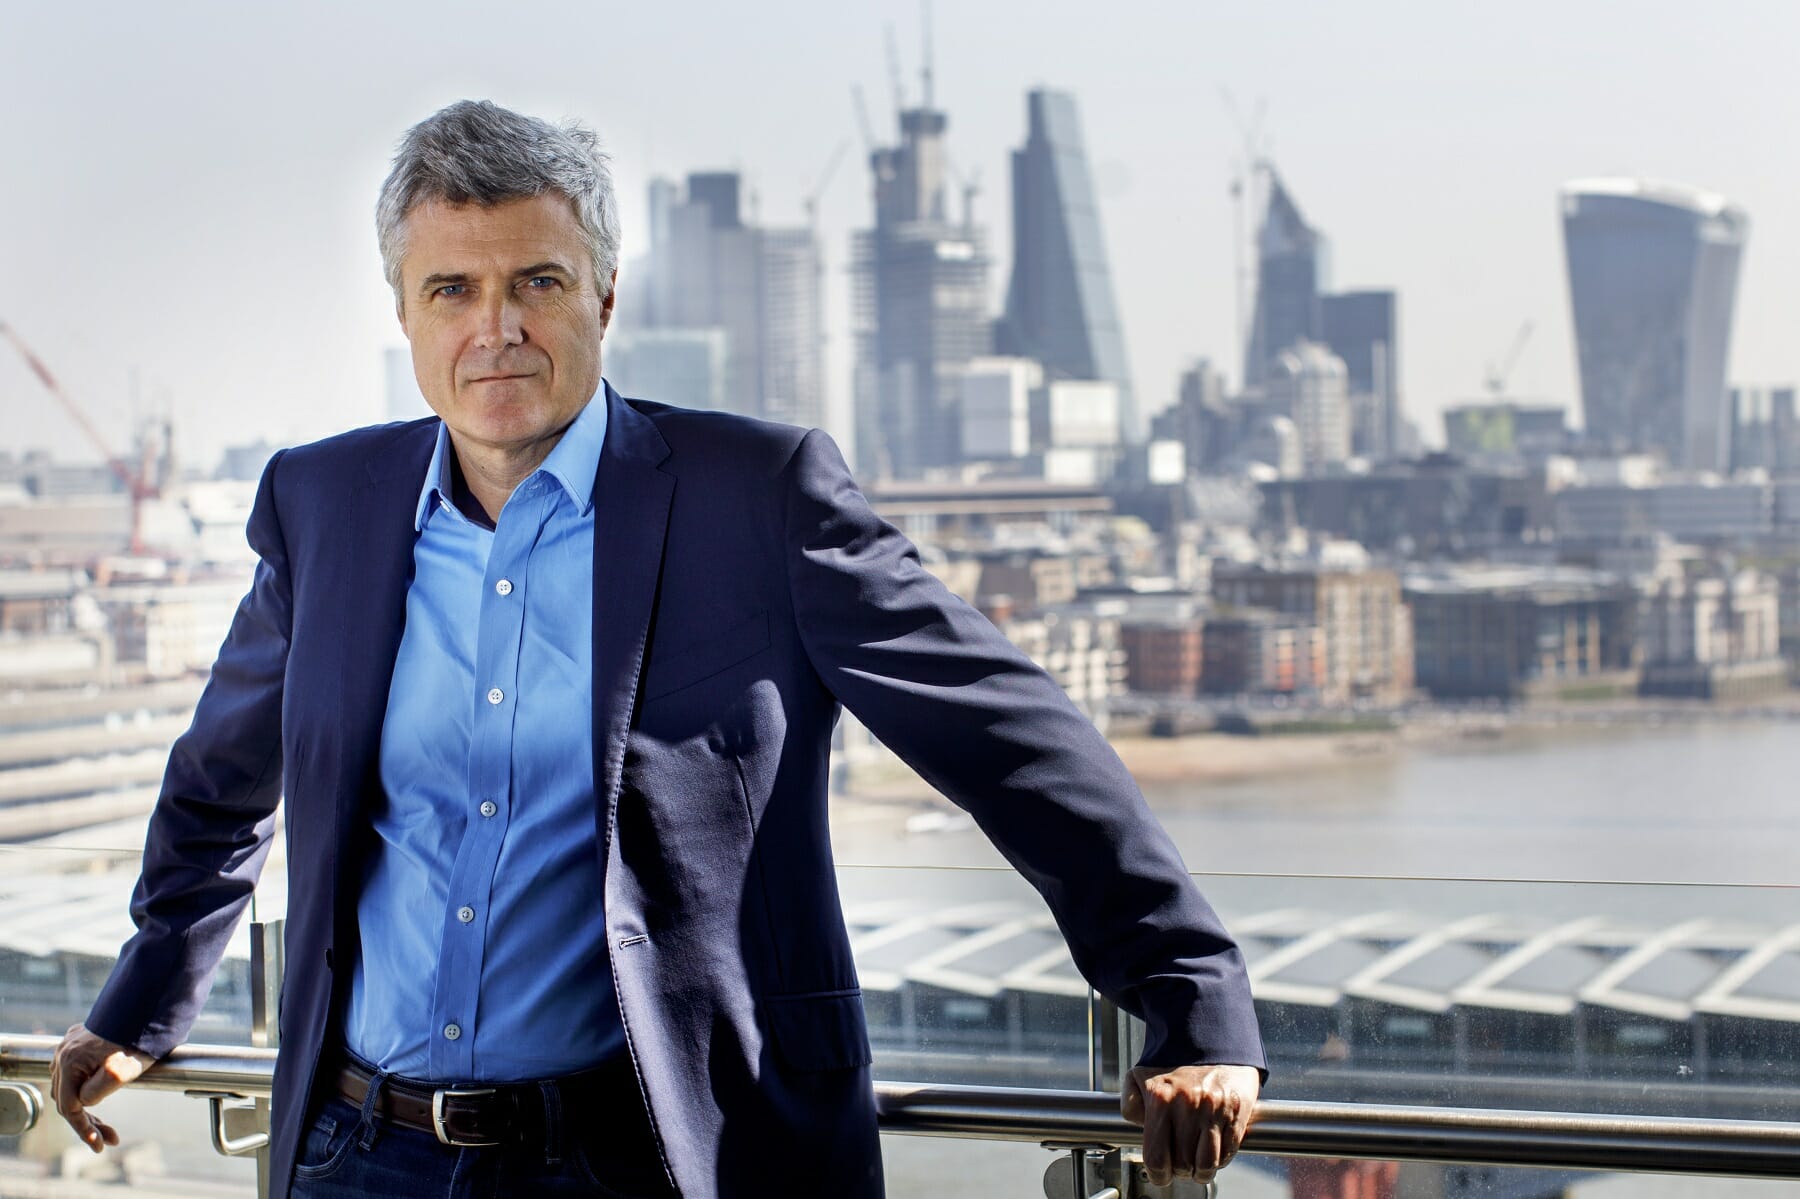 WPP’s Mark Read awarded more than $4.8m in pay and bonuses in 2018